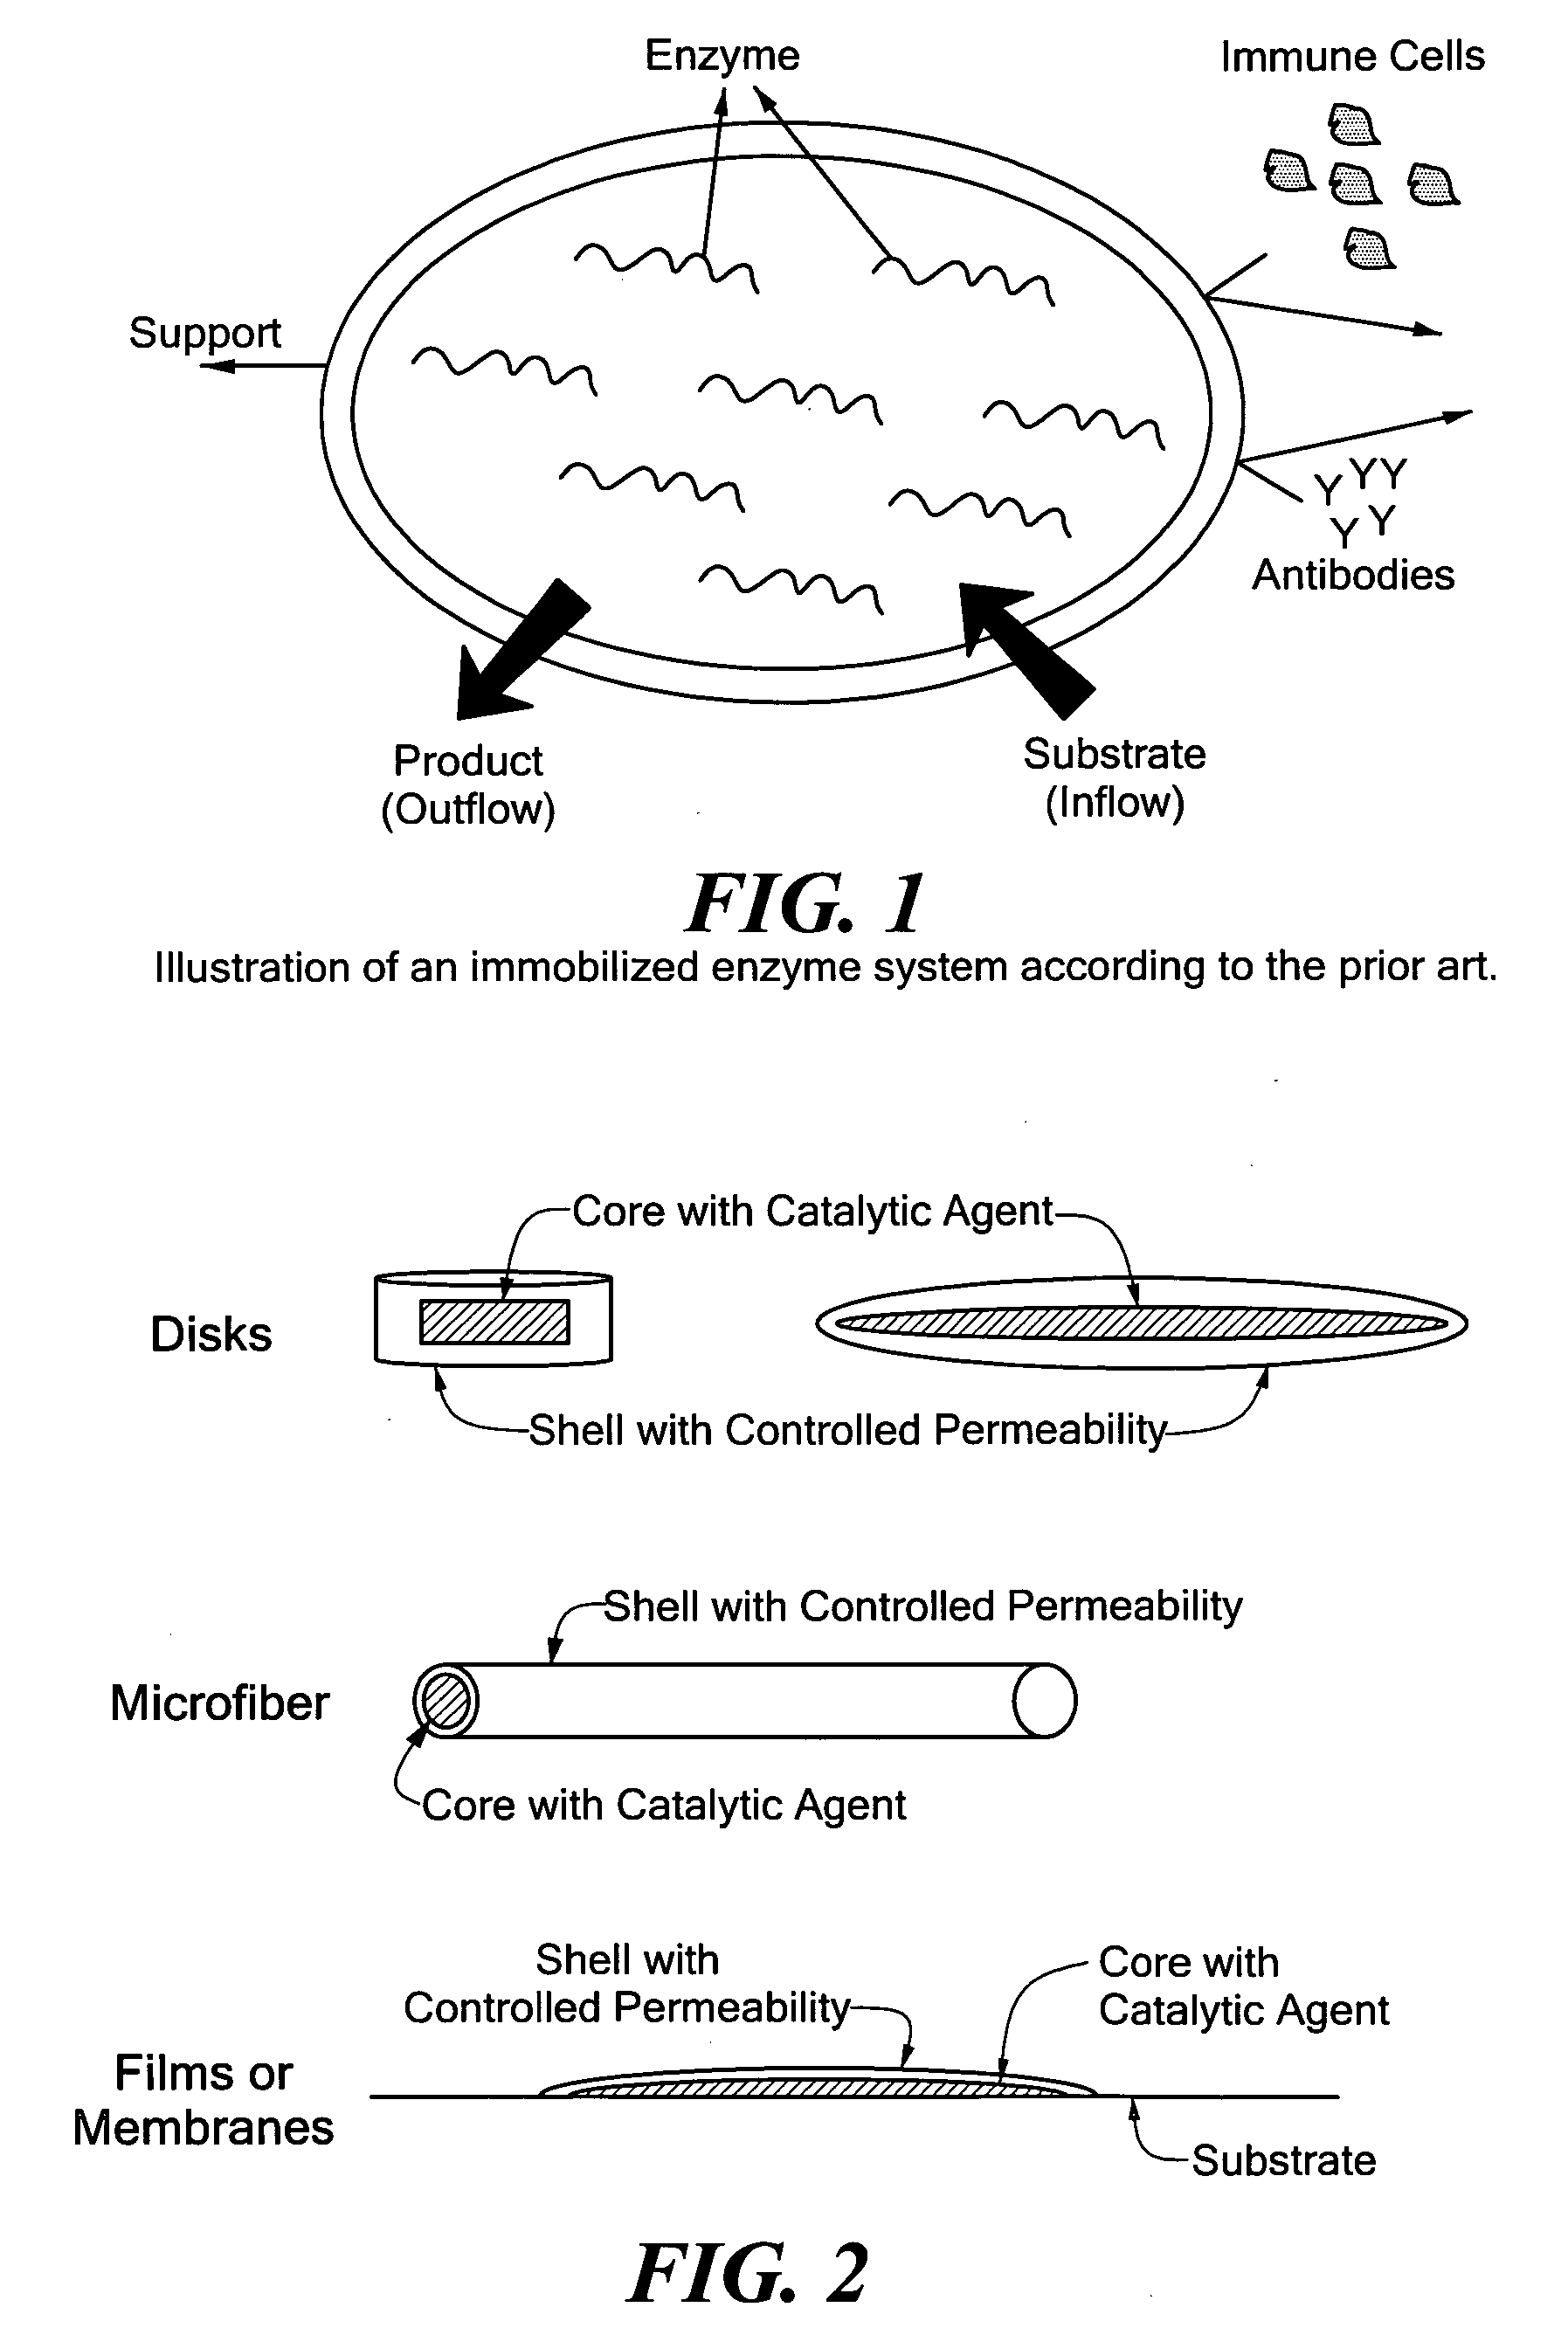 Hybrid immobilized catalytic system with controlled permeability